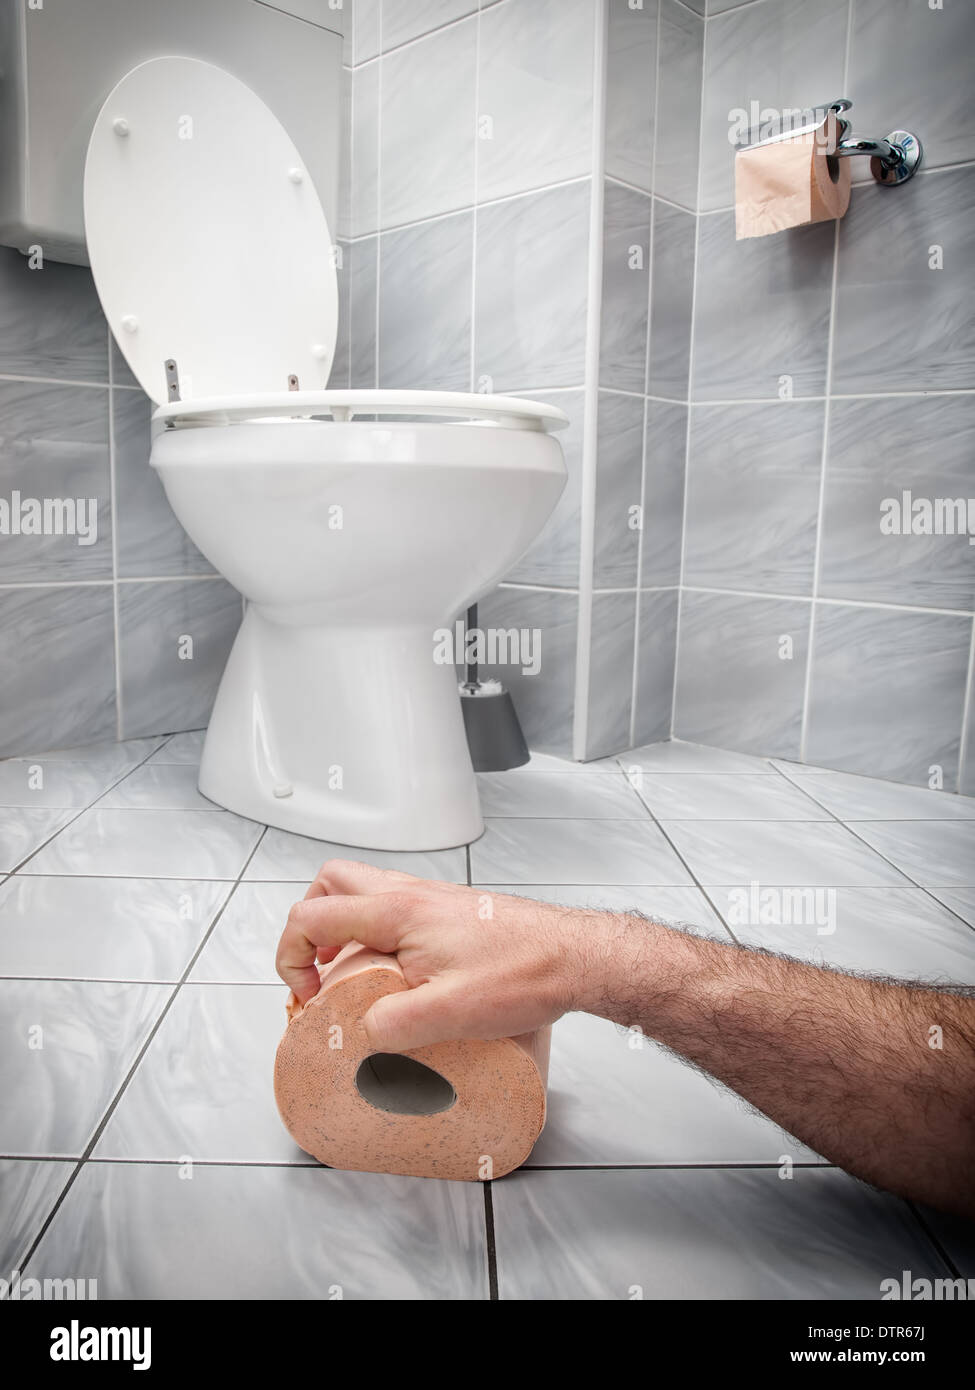 Concept image of digestive problems and difficulties in the toilet. Stock Photo